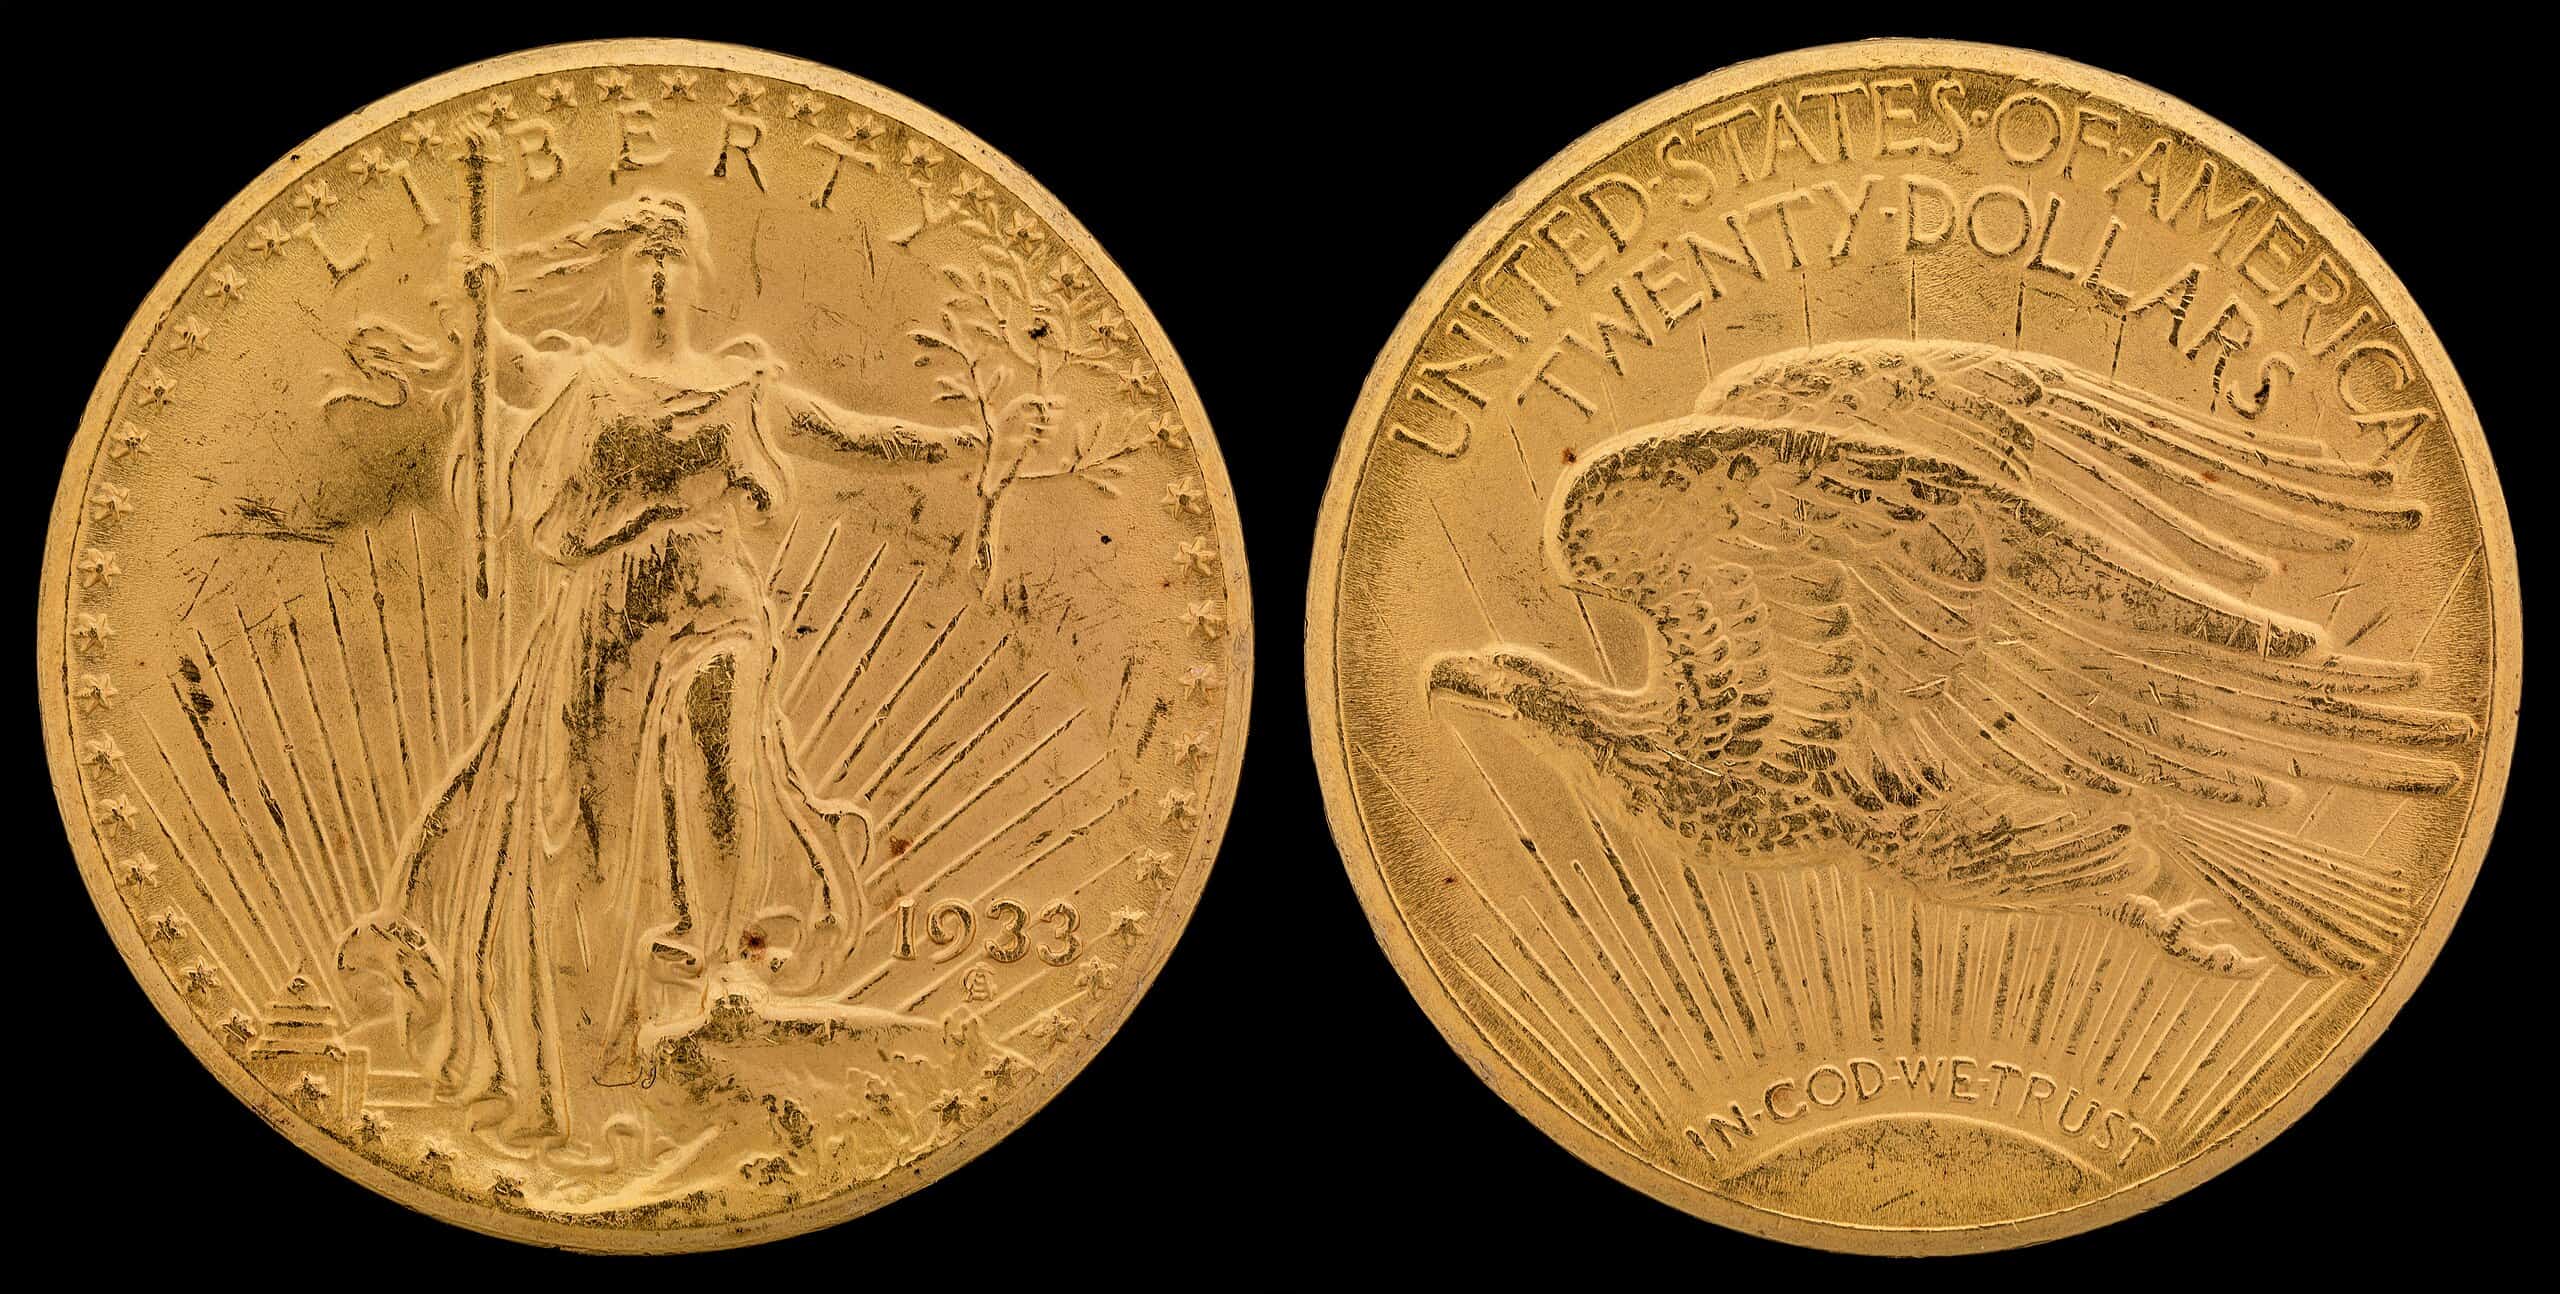 <p>The 1933 Saint-Gaudens Double Eagle is one of the rarest coins in the world. It features Lady Liberty striding forward with a torch and olive branch, designed by Augustus Saint-Gaudens. The reverse shows a majestic eagle in flight, symbolizing liberty and peace. This coin was never officially circulated due to the discontinuation of the gold standard during the Great Depression. Only a few legally released coins exist today. One of these coins sold for a staggering <strong>$7.6 million</strong>. Its rarity, combined with its exquisite design, makes it a coveted piece for collectors.</p>